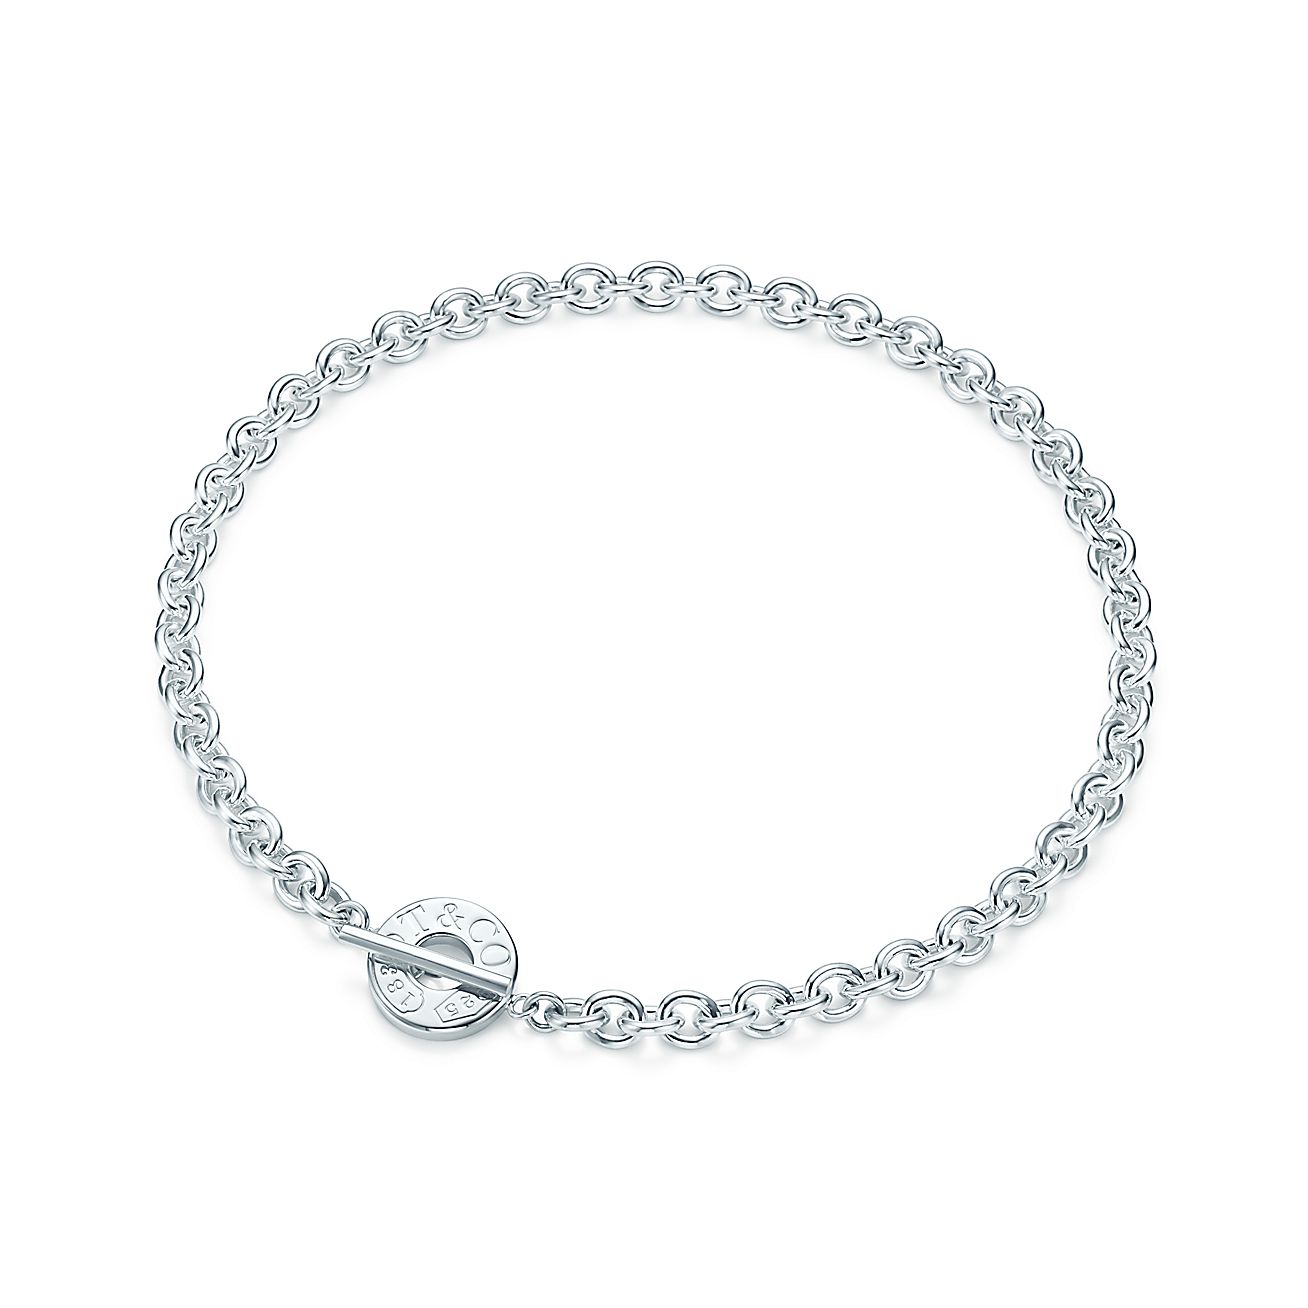 Tiffany 1837™ toggle necklace in sterling silver. | Tiffany & Co.